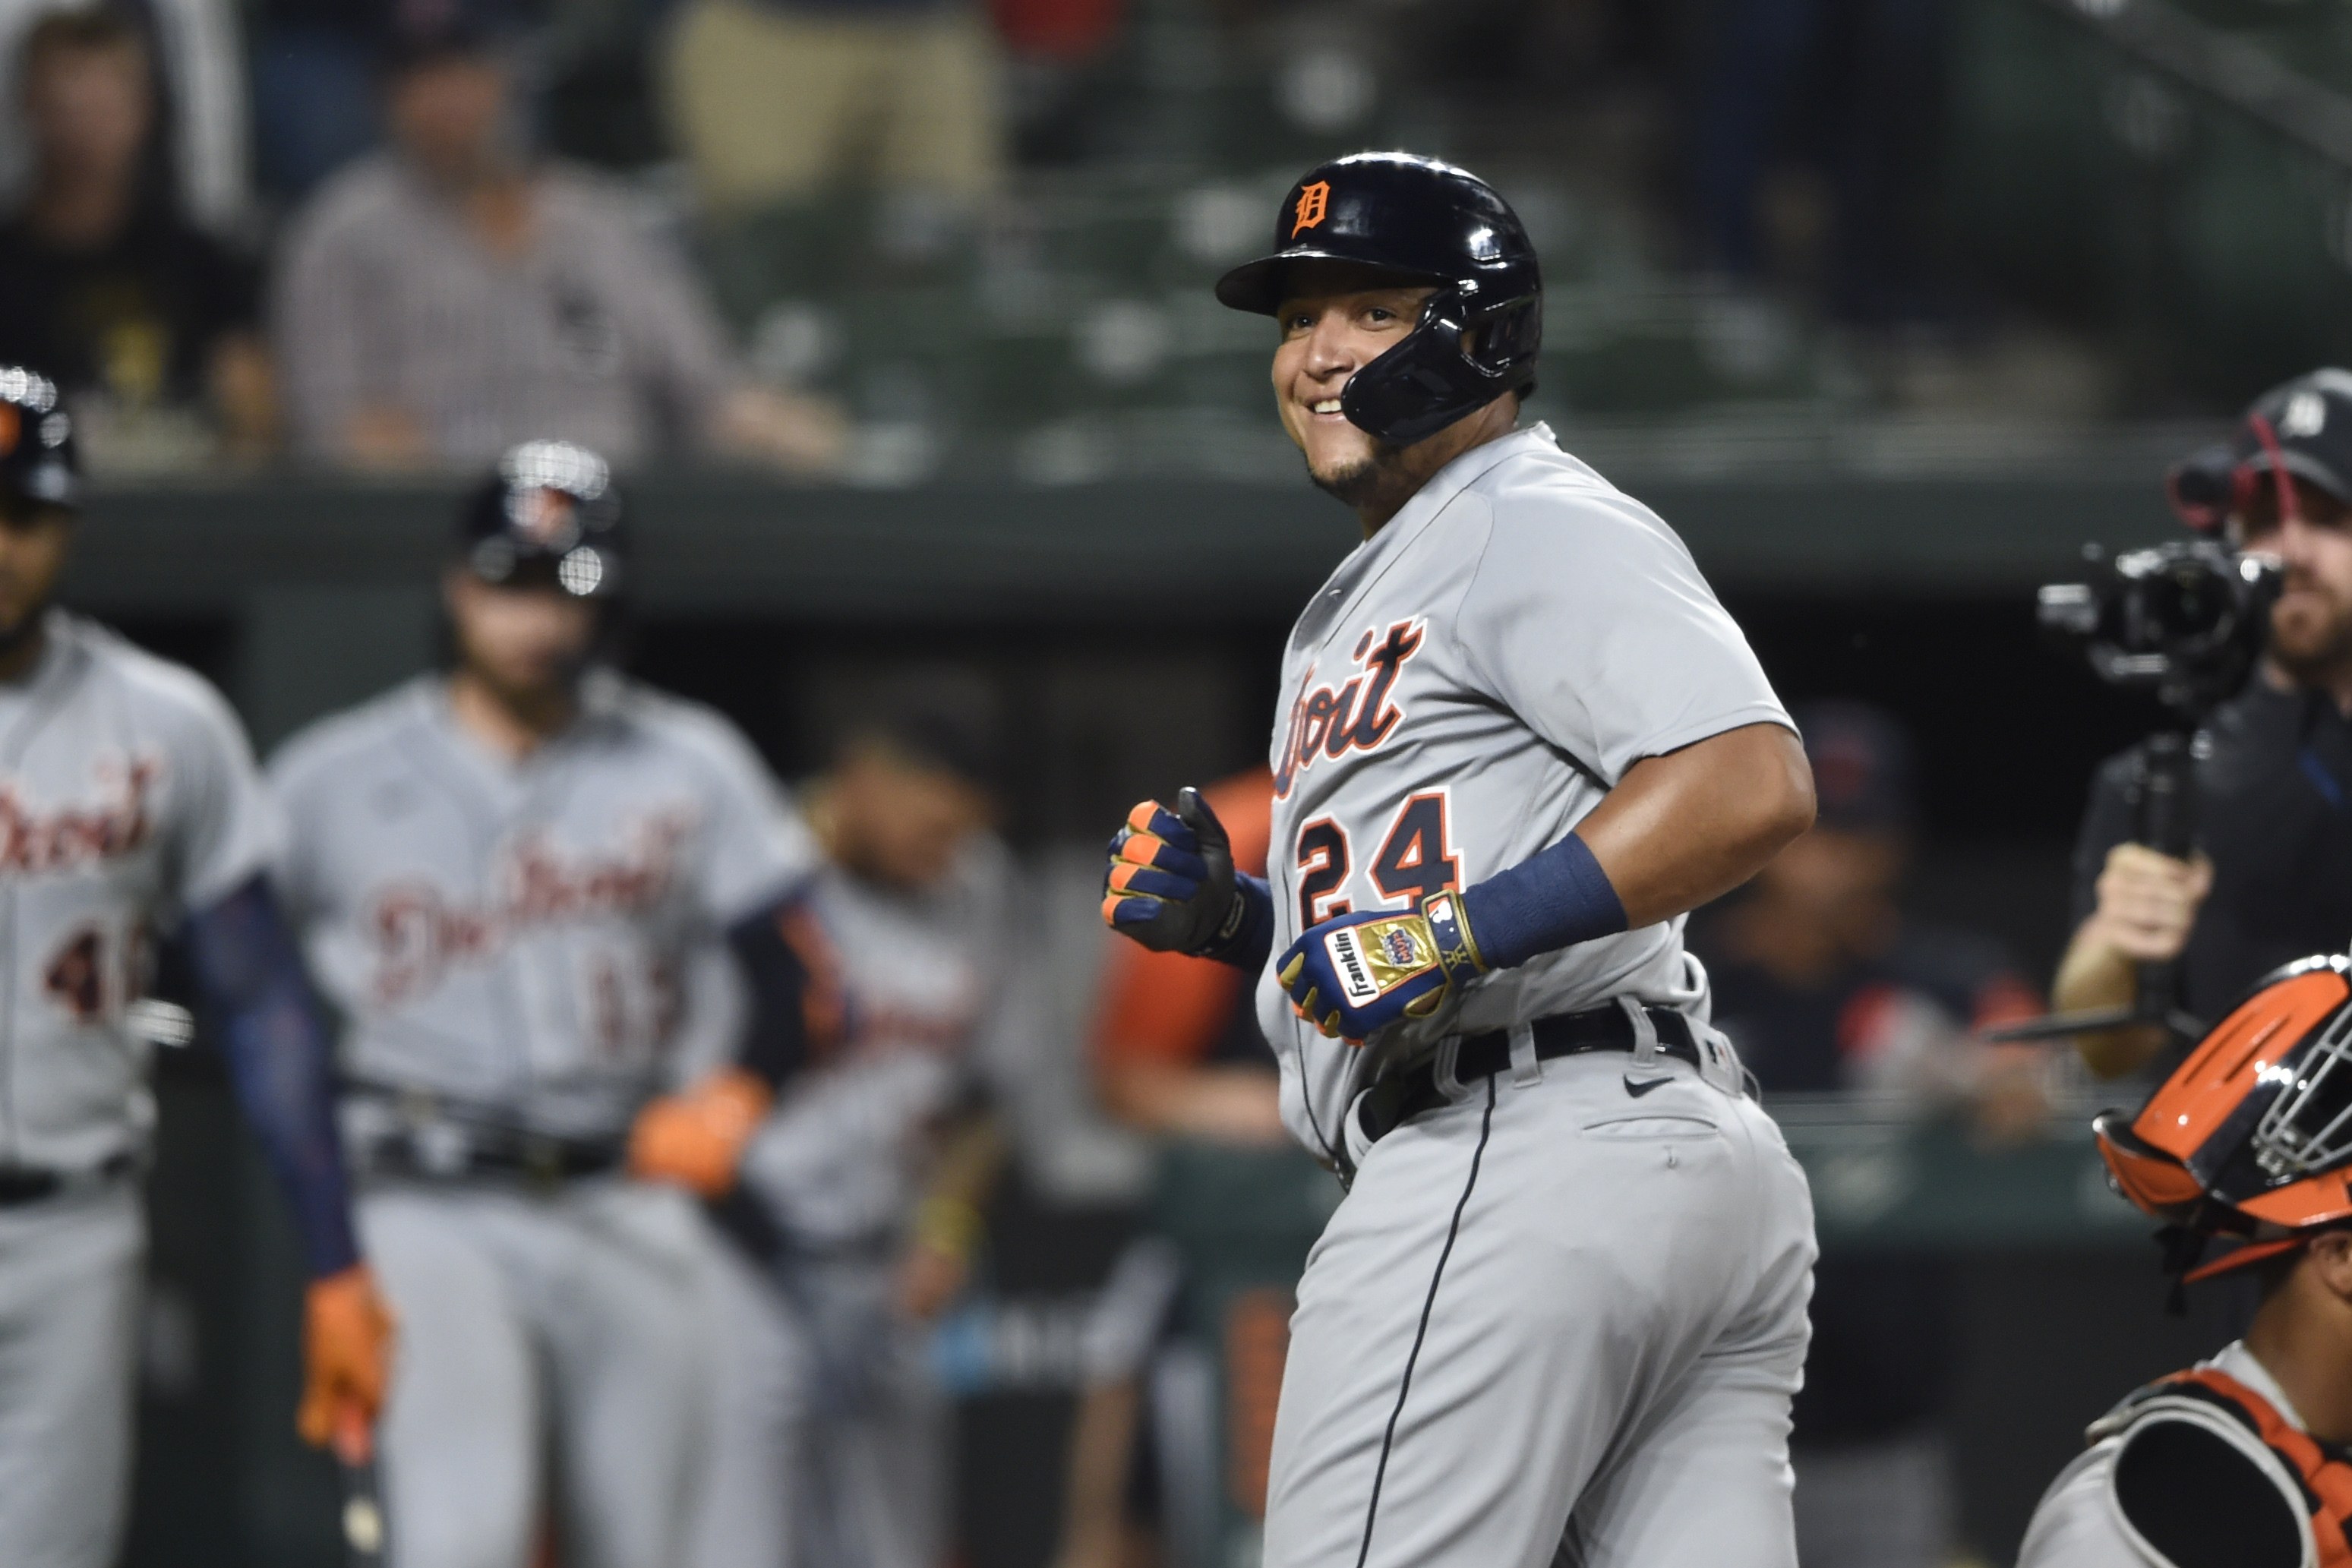 Detroit's Miguel Cabrera comes to Cleveland two homers shy of 500